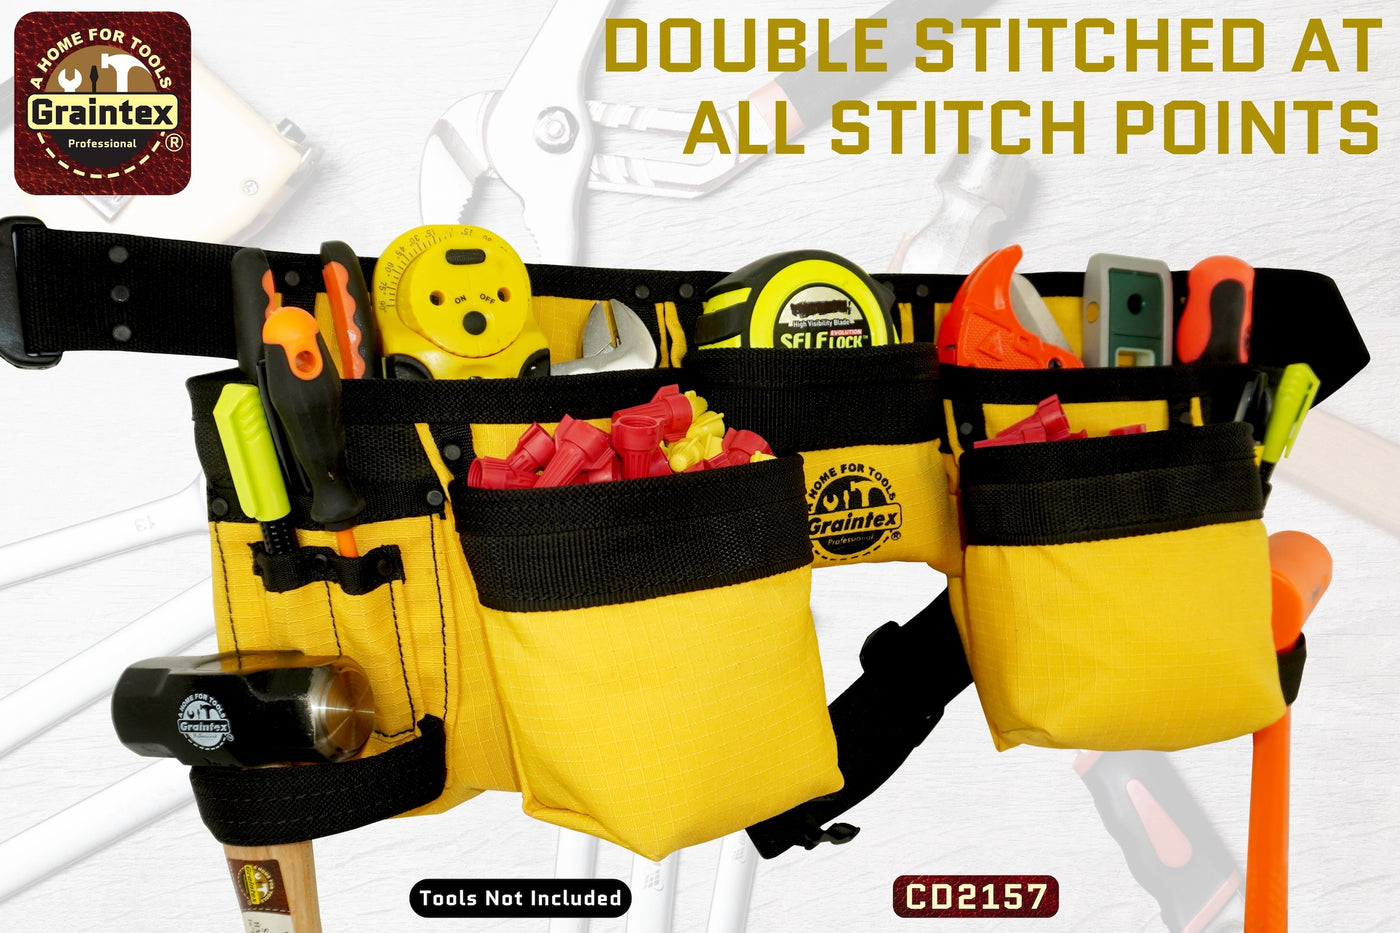 CD2157 :: 11 POCKET FINISHER CANVAS TOOL BELT YELLOW COLOR RIP-STOP CANVAS